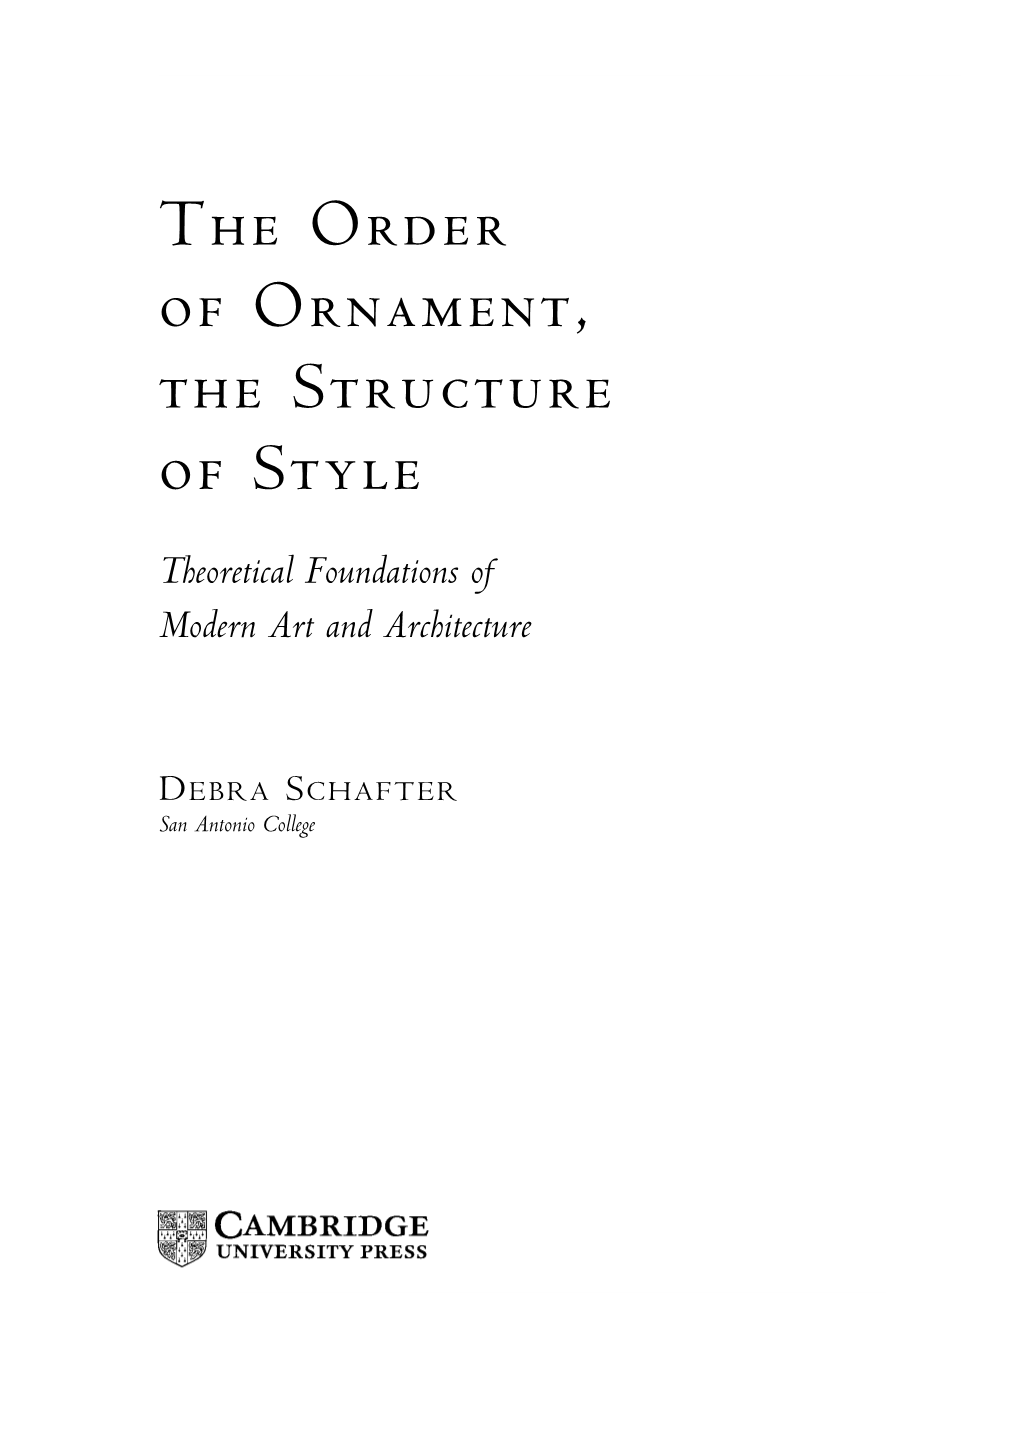 The Order of Ornament, the Structure of Style